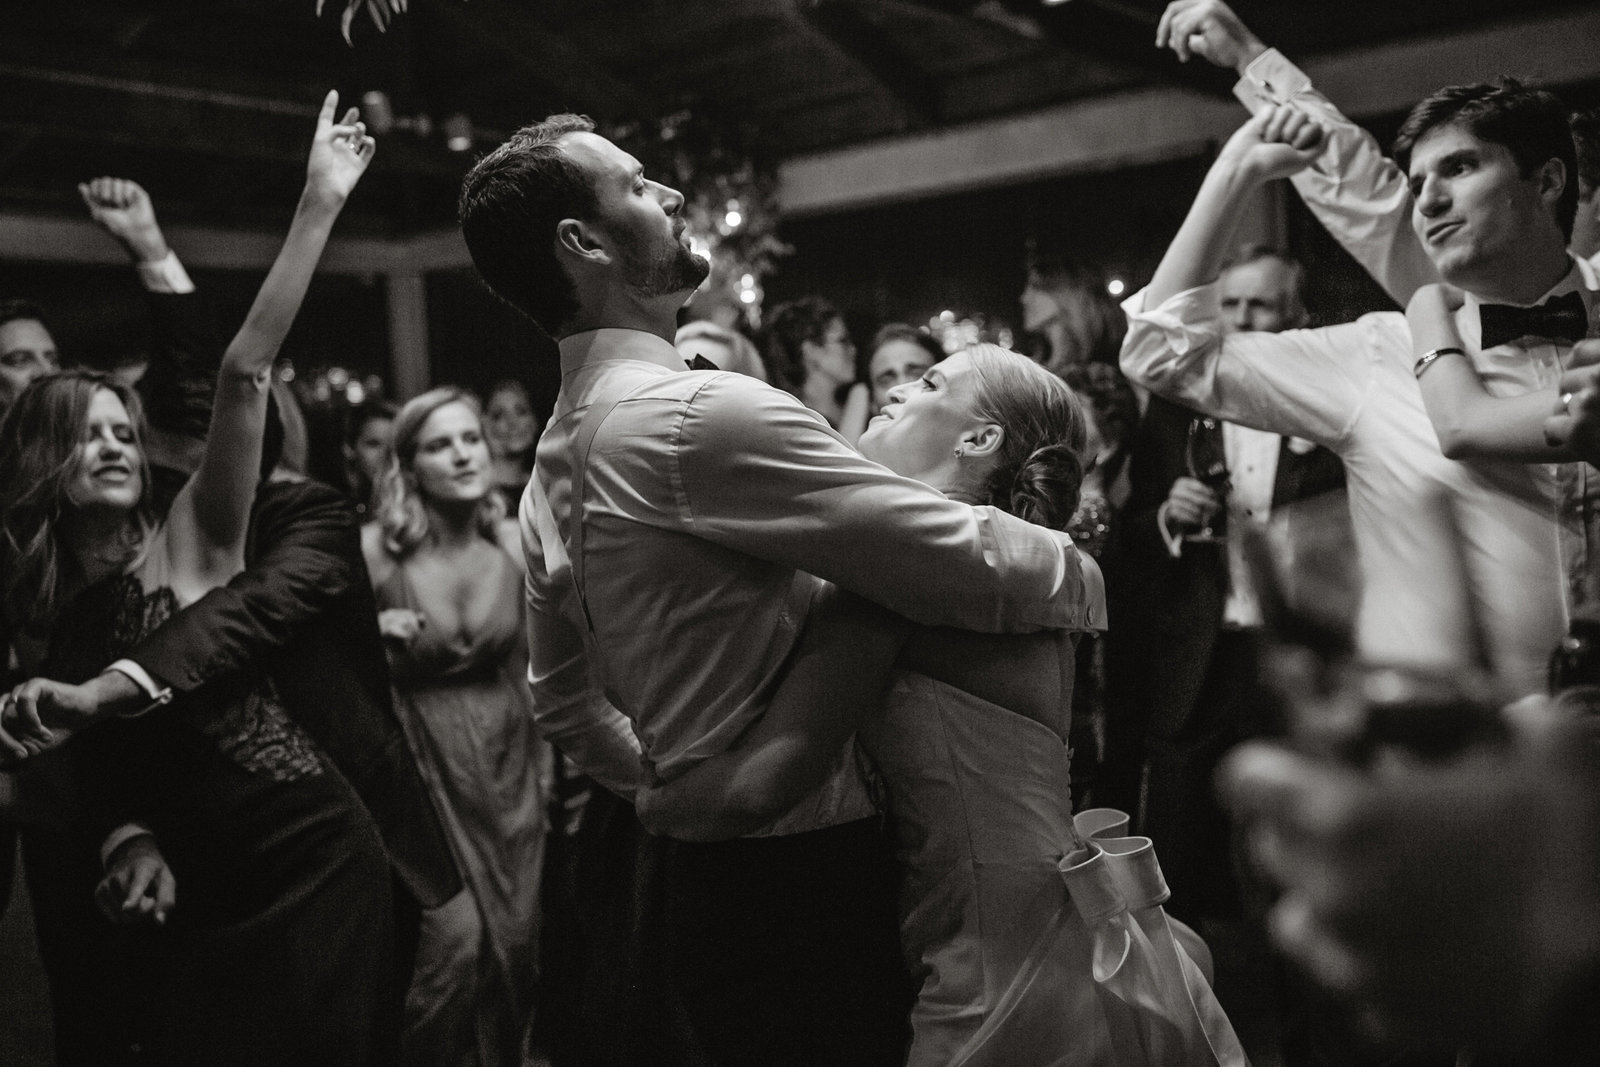 A memorable moment, captured by Sweetwater, of the bride and groom surrounded by their friends and family.